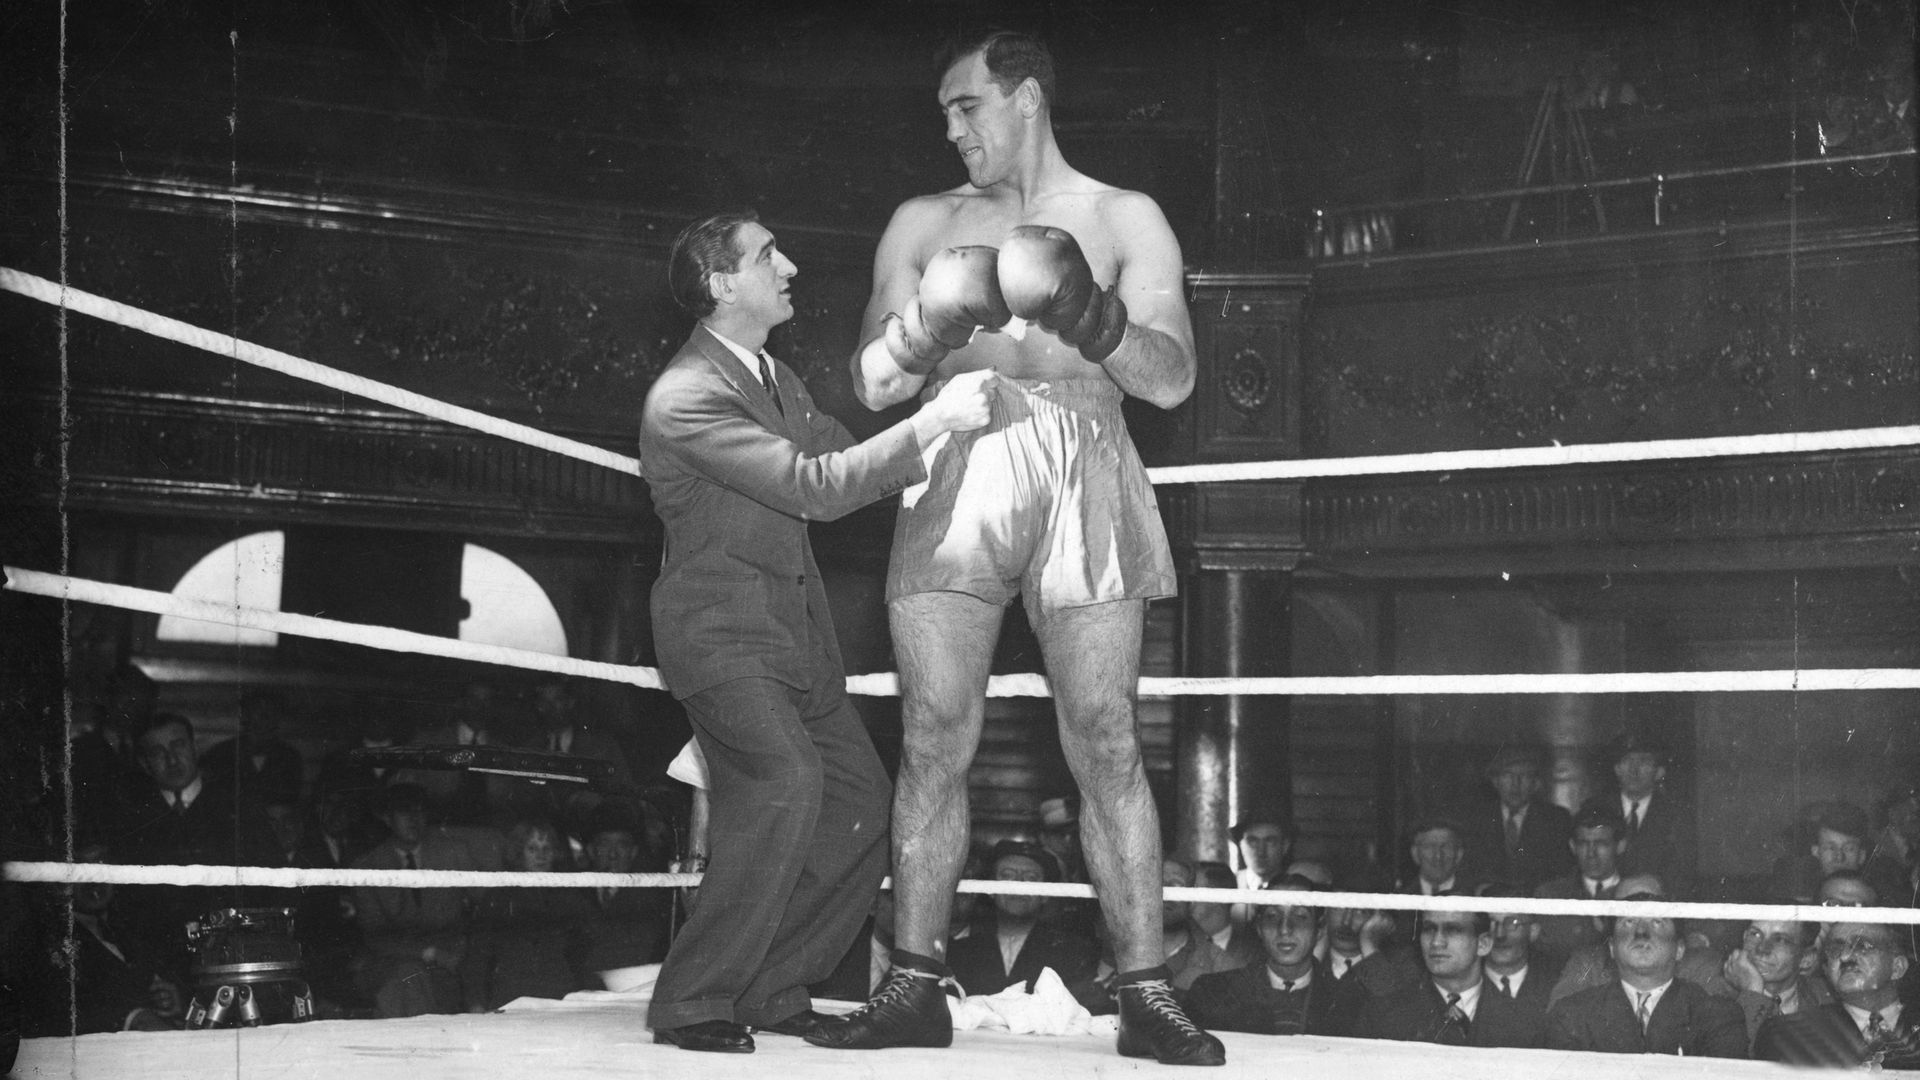 Primo Carnera at The Ring venue, Blackfriars Road, London, having his shorts adjusted, in 1937 - Credit: Getty Images